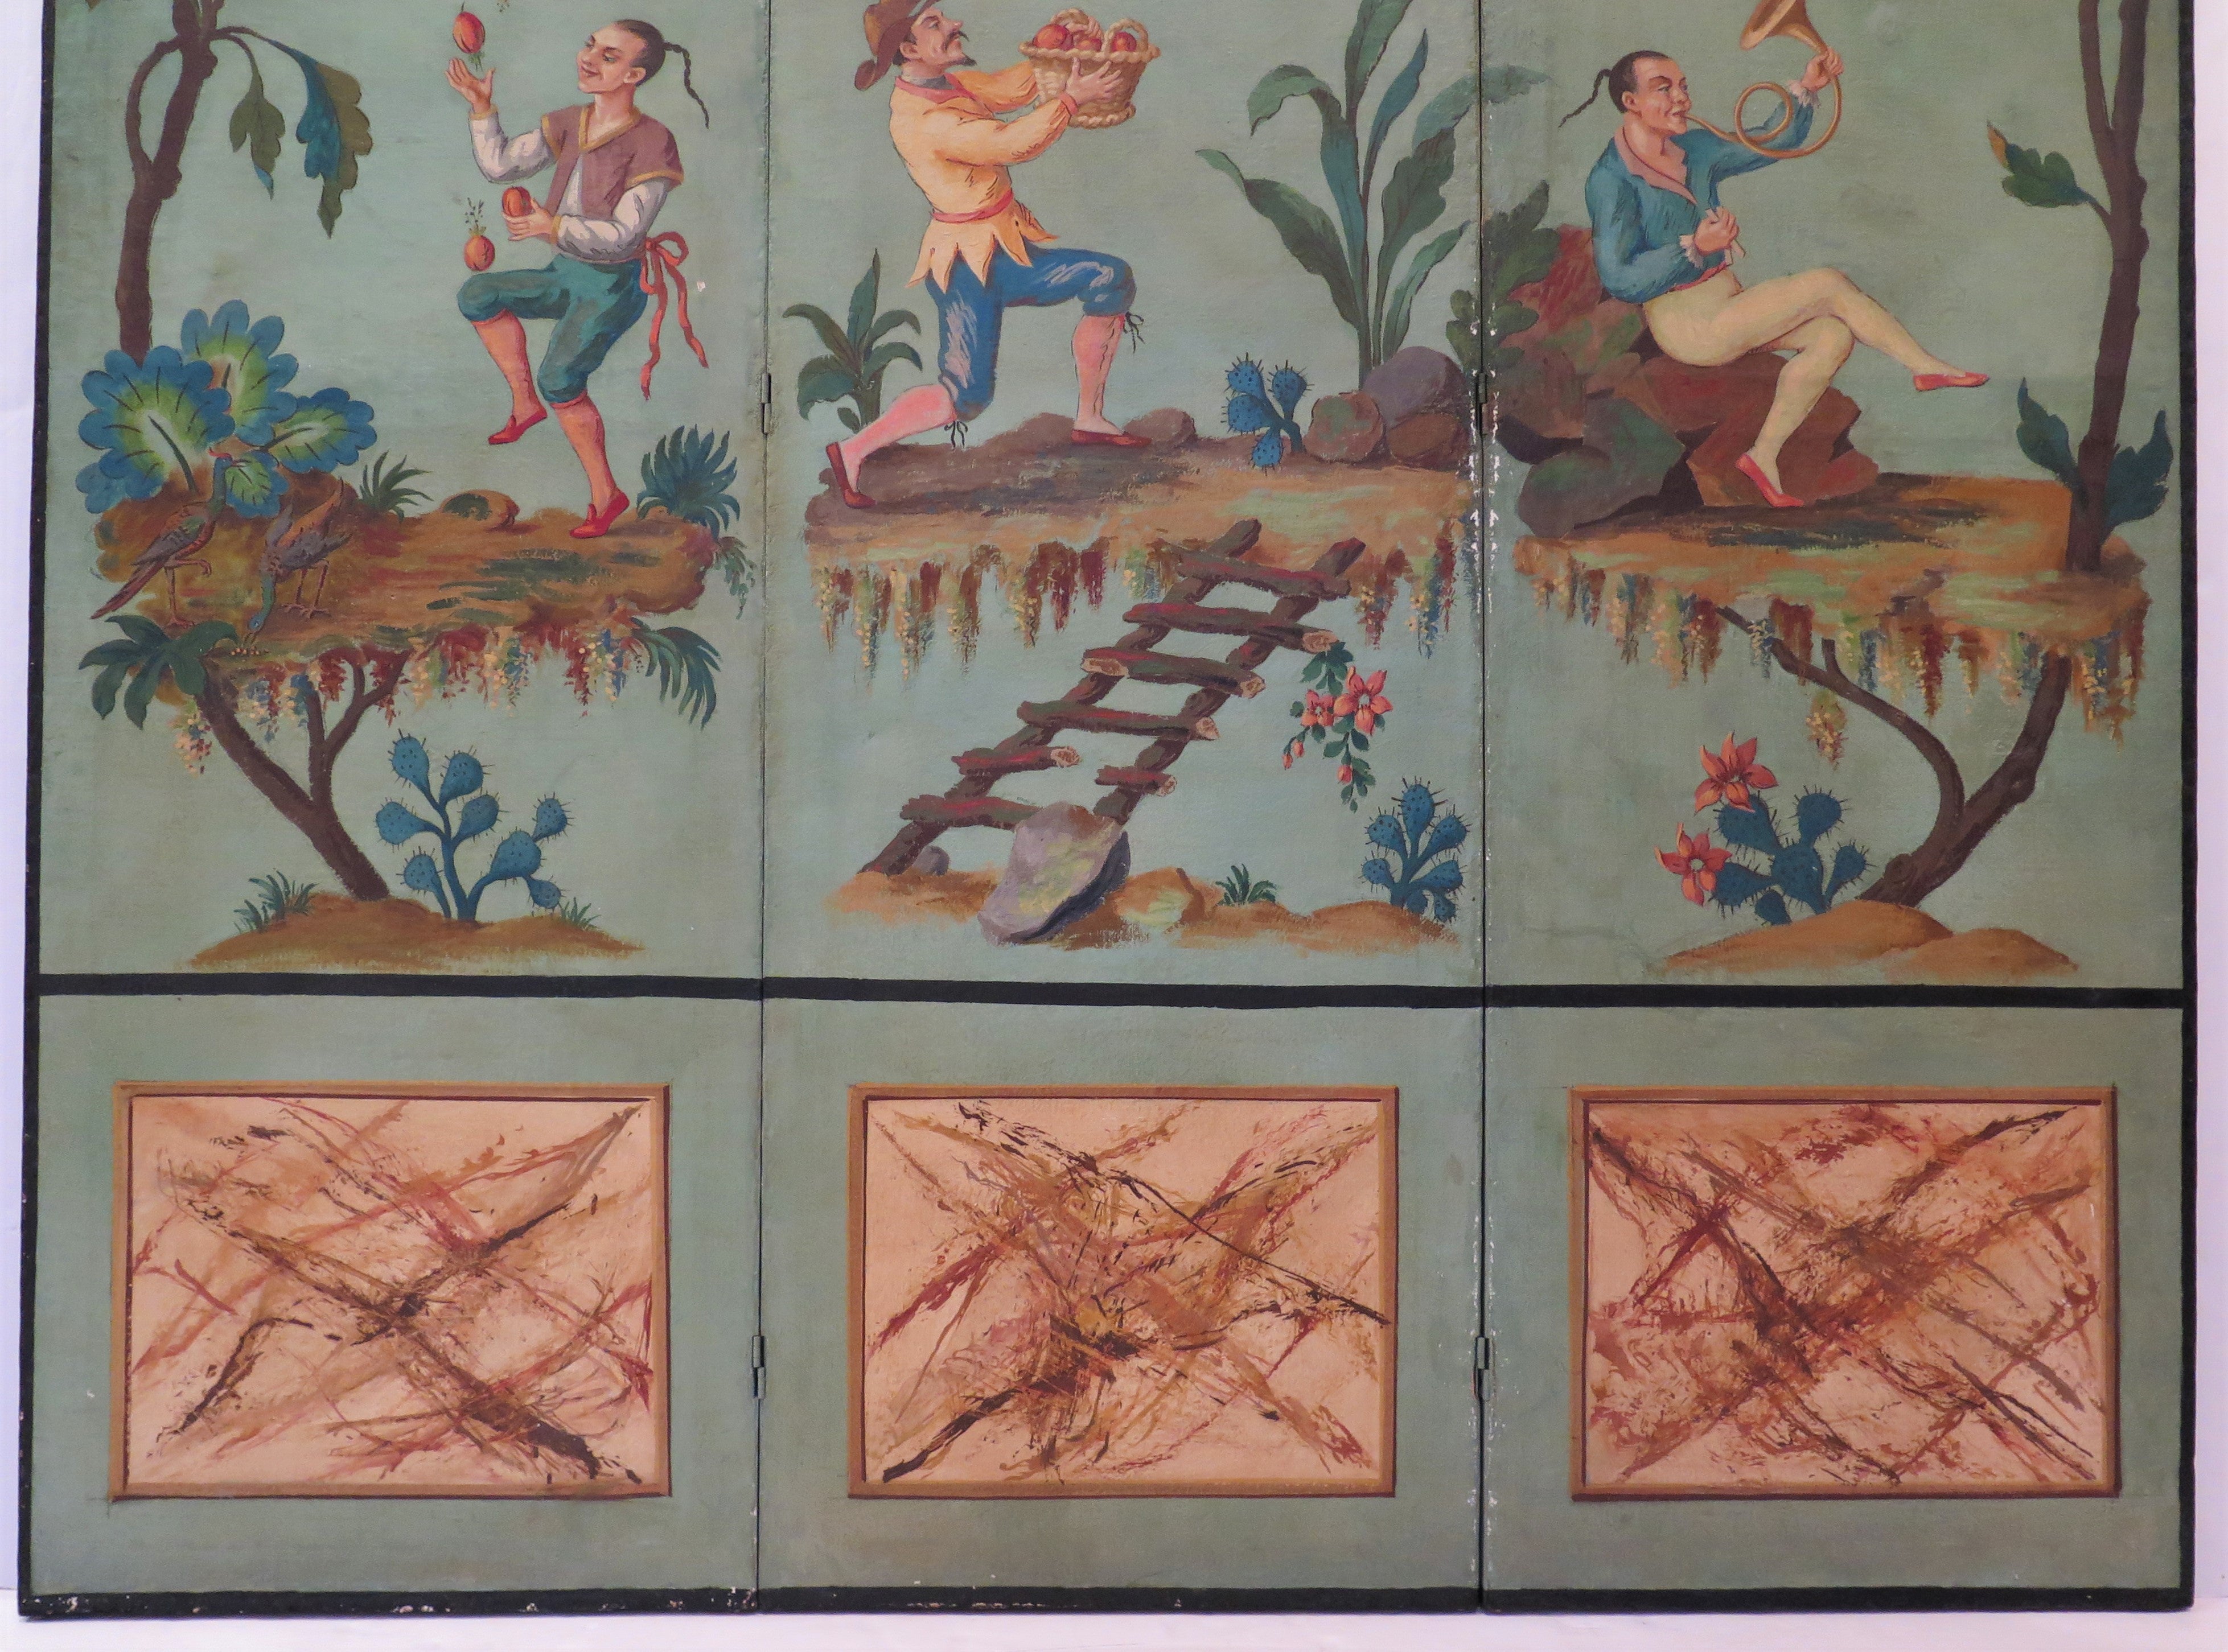 Near Pair of Three Panel Screens / An Homage to French Chinoiserie Decoration